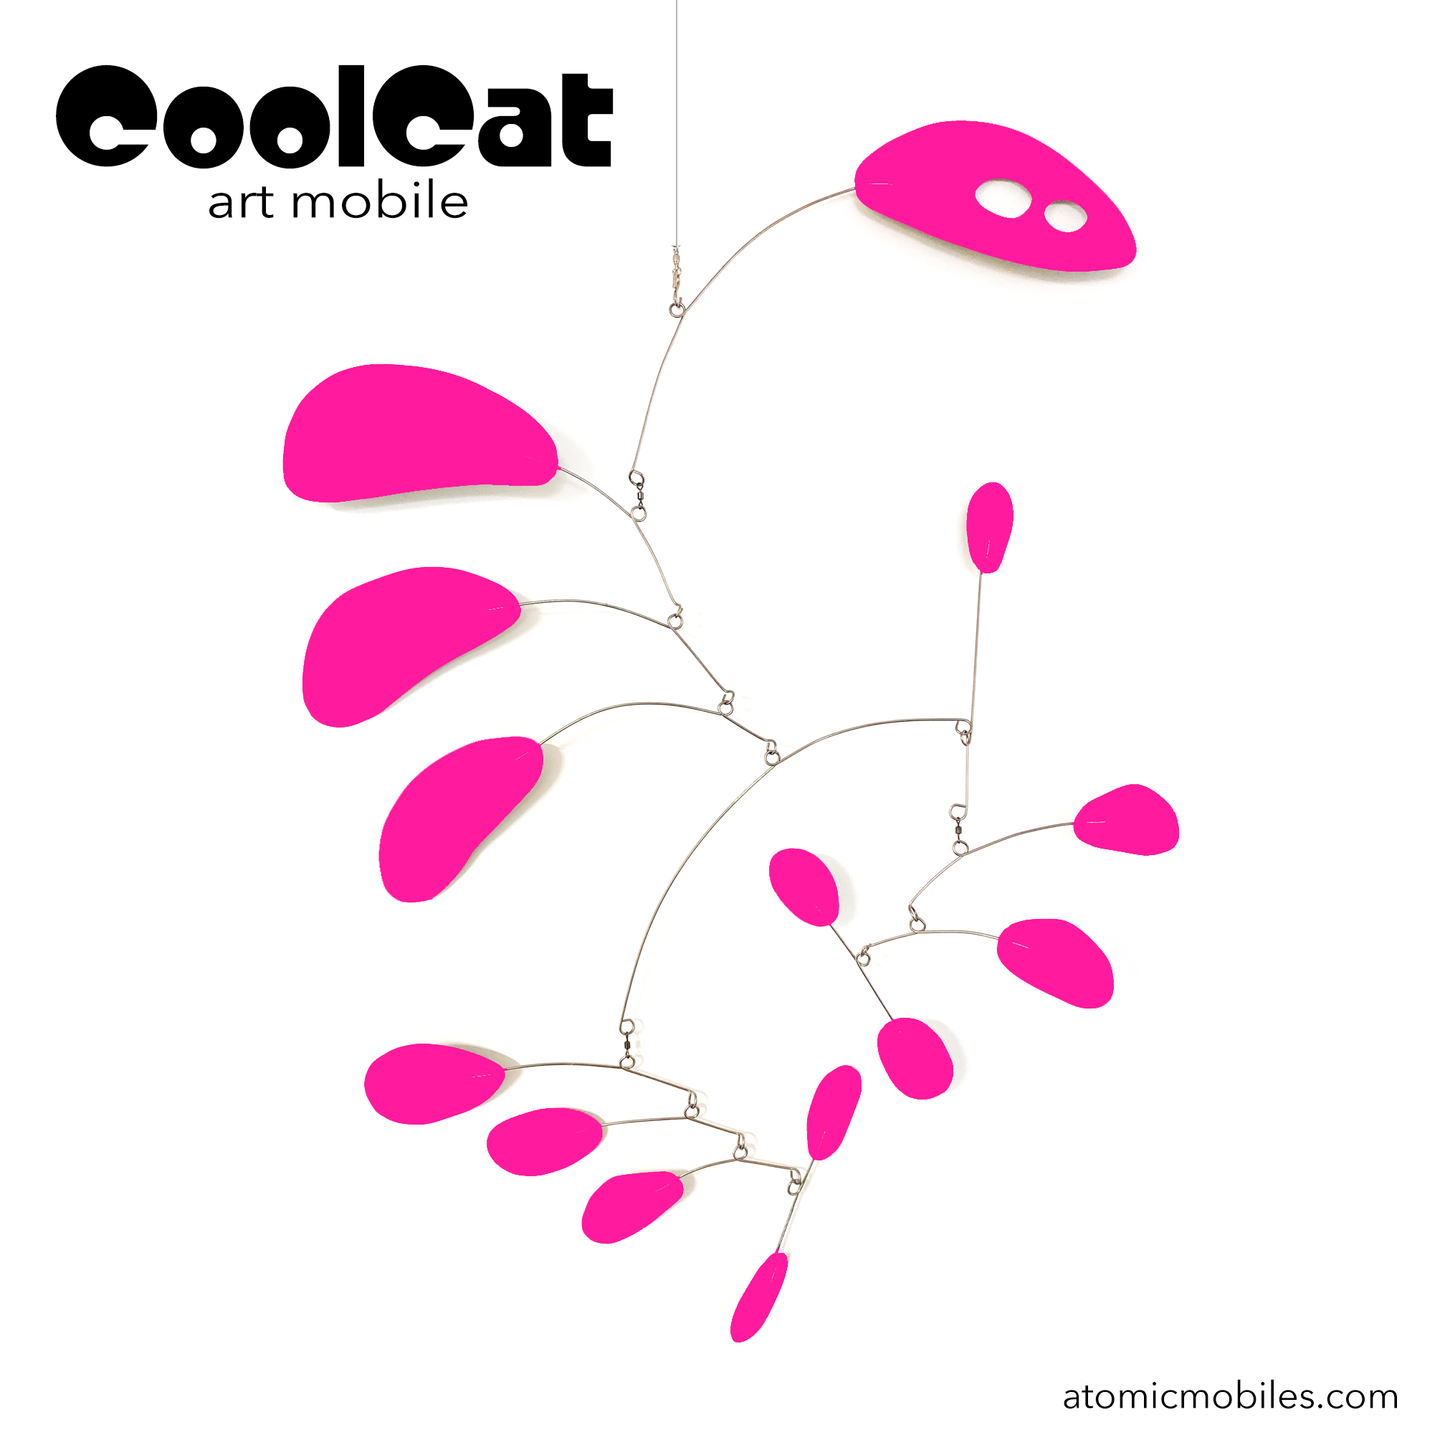 CoolCat kinetic art mobile in Intense Hot Barbie Dream House Pink - hanging art mobile in MOD mid century modern style for your Barbiecore home decor by AtomicMobiles.come home decor by AtomicMobiles.com